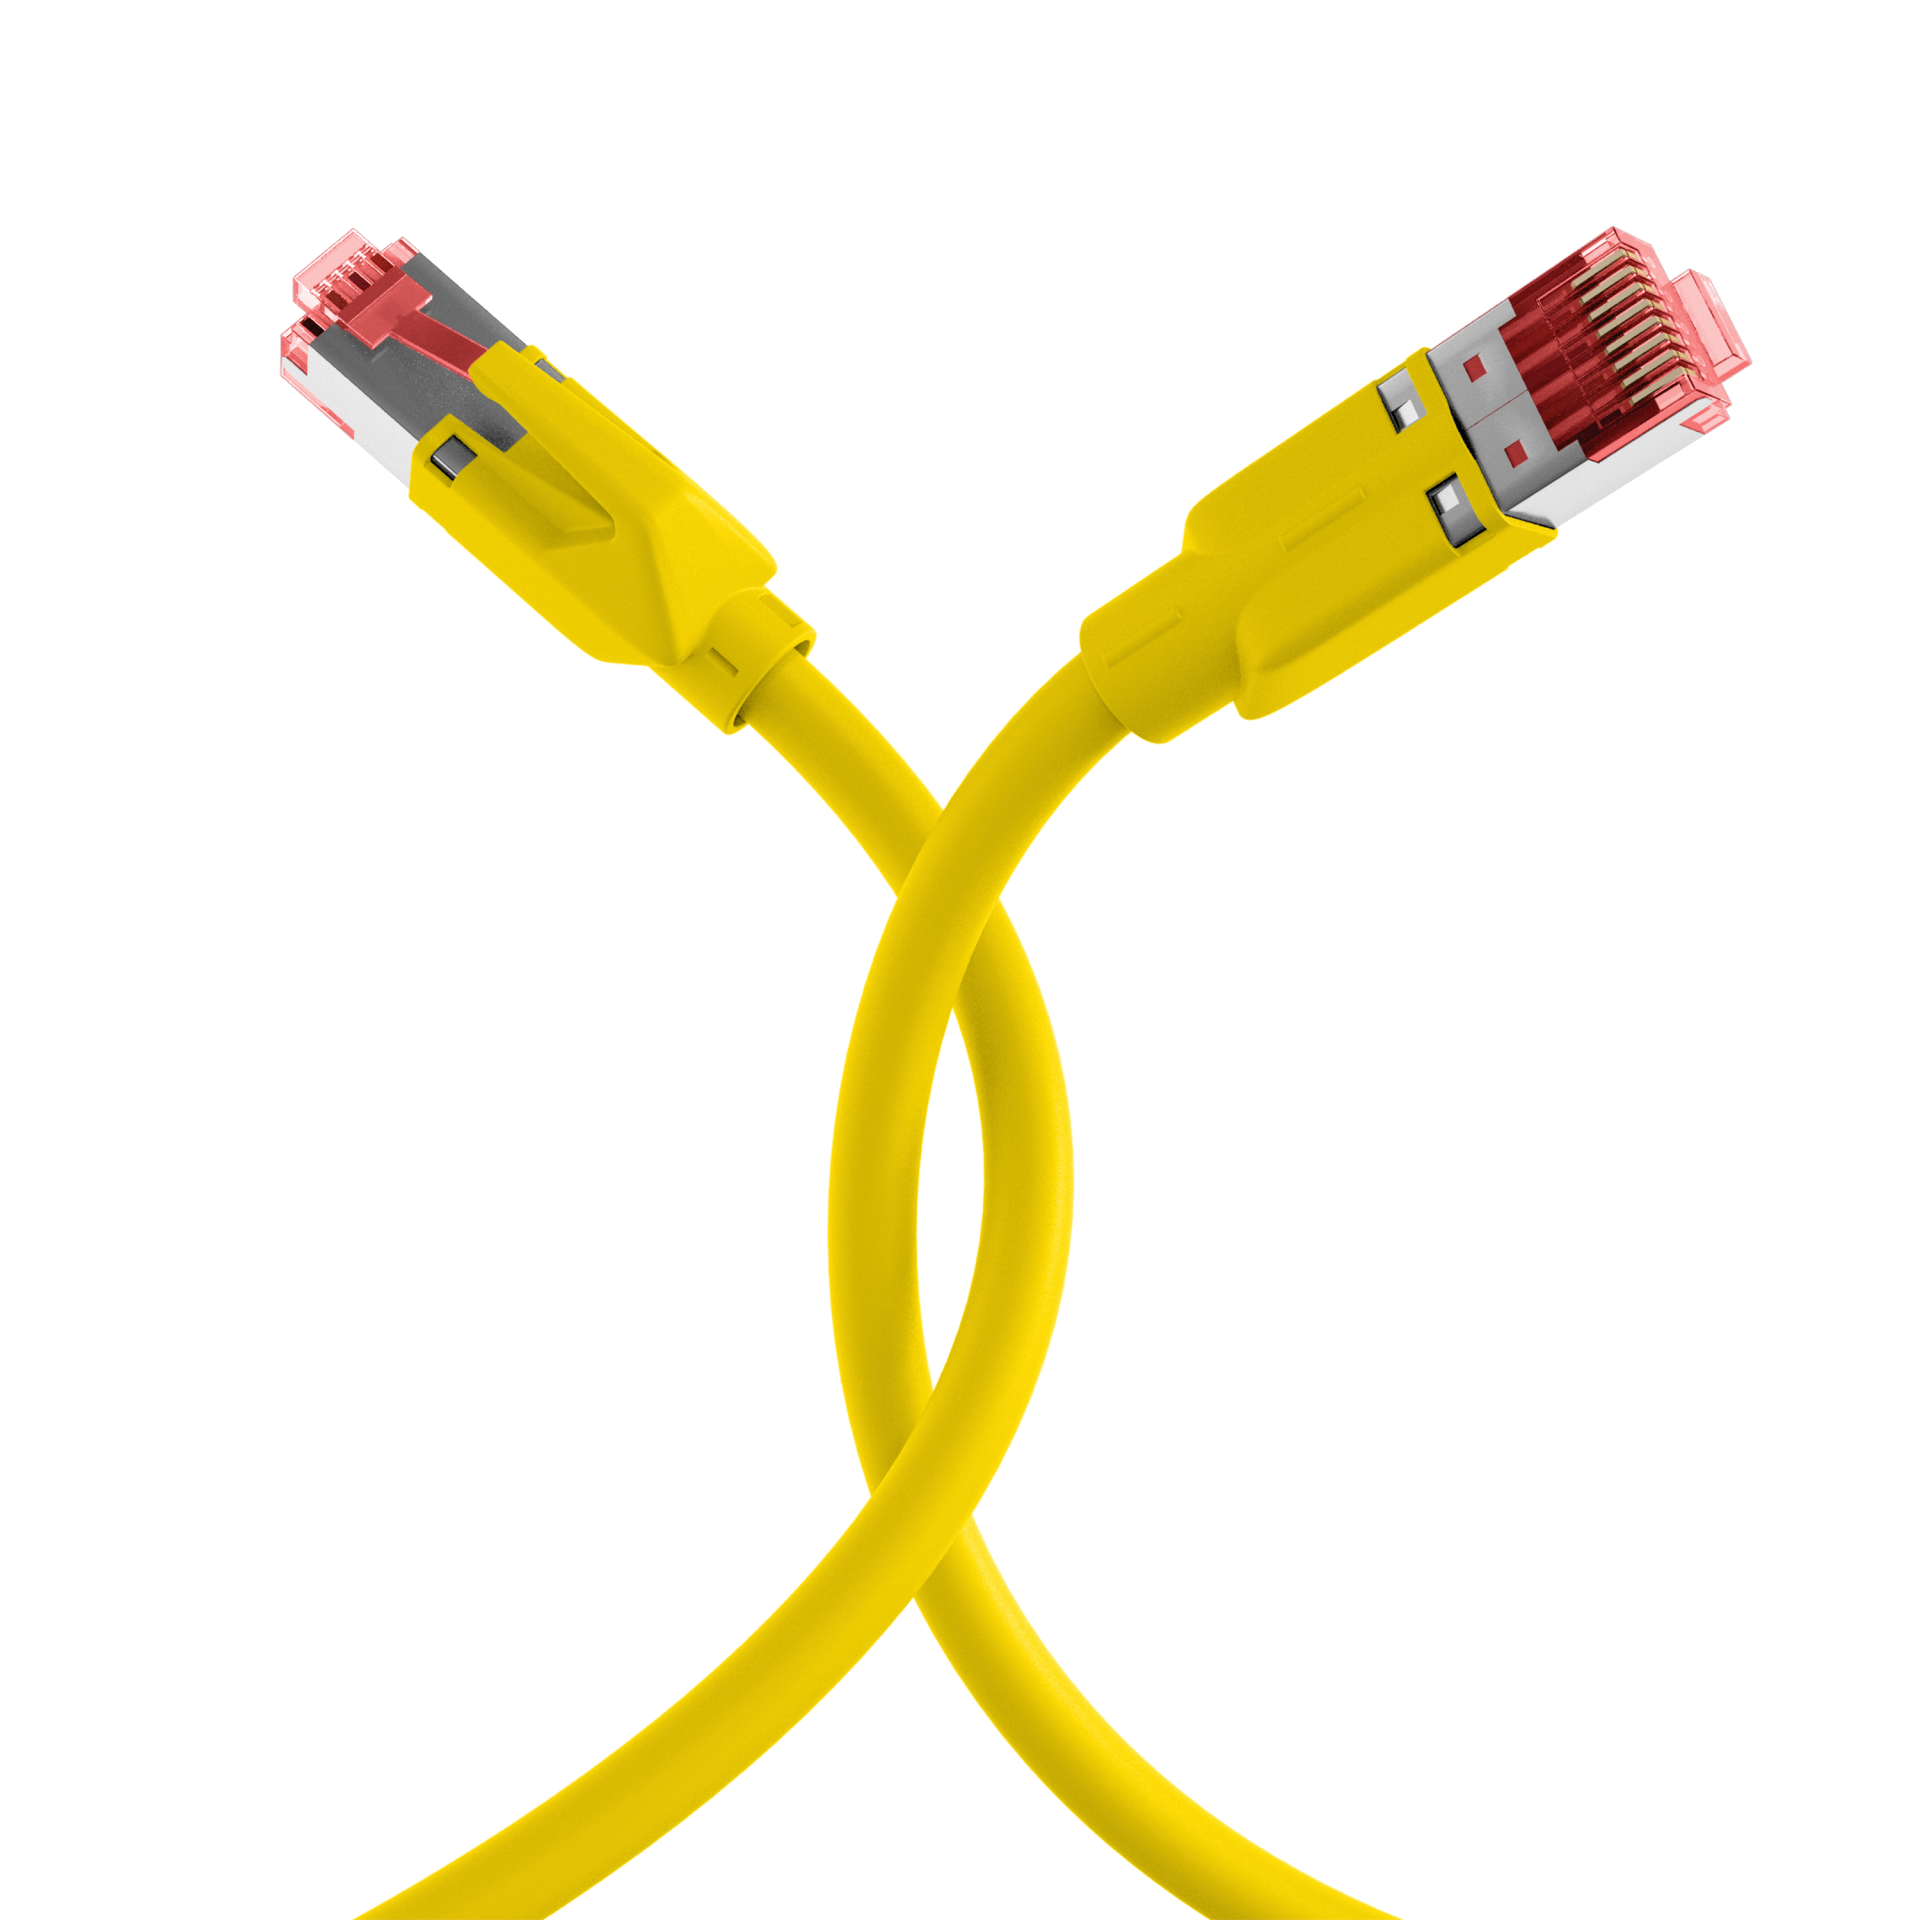 RJ45 Patch Cord Cat.5e SF/UTP PURTM21 for drag chains yellow 30m